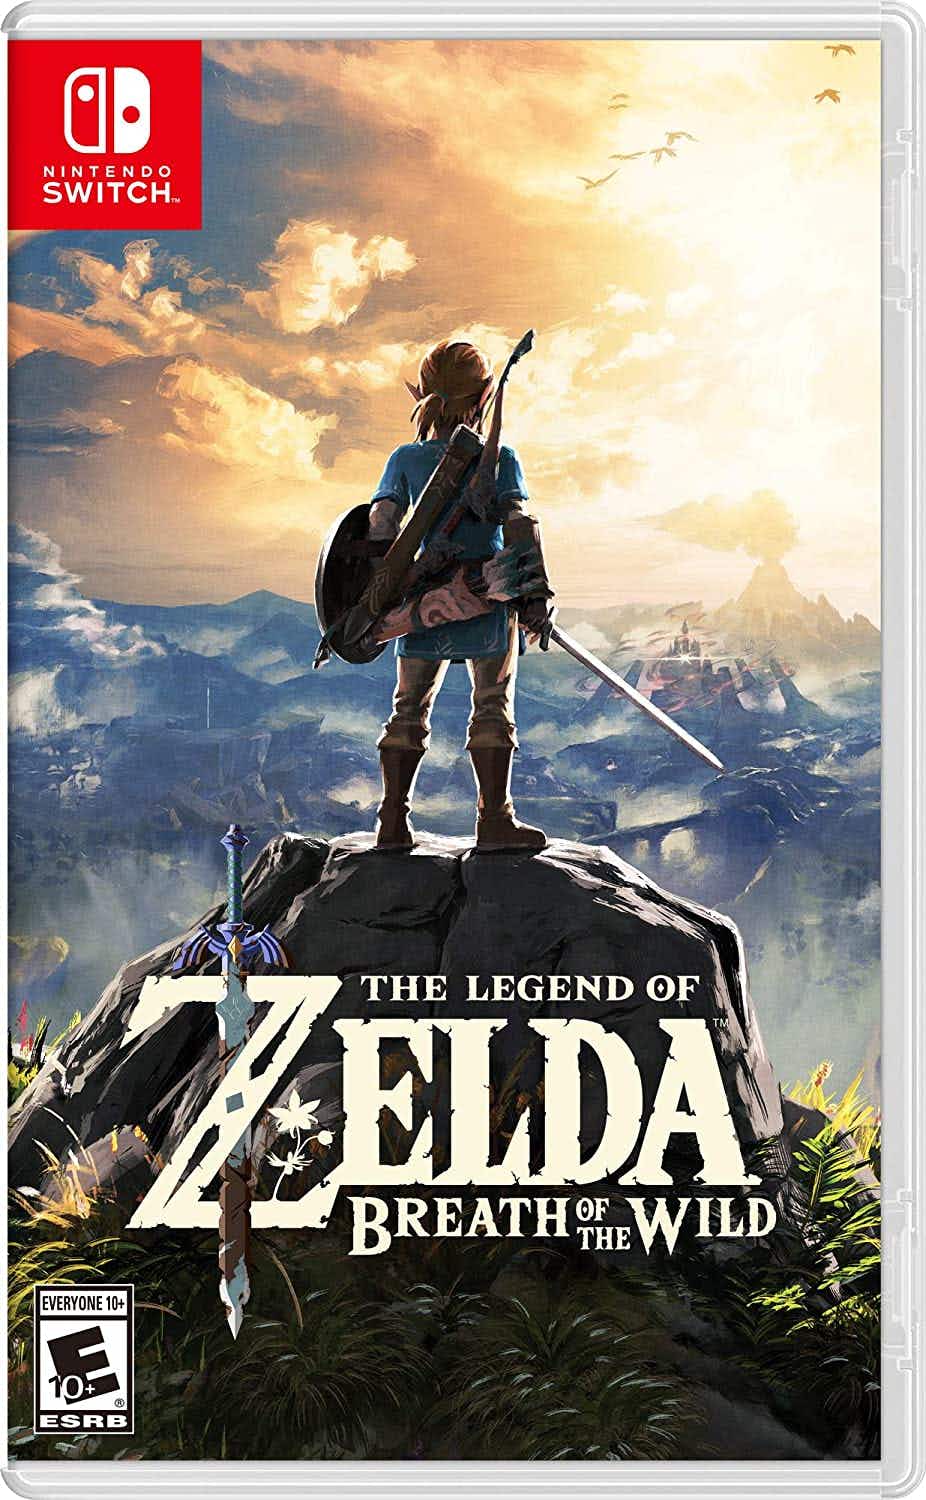 Zelda's Breath of the Wild video game cover